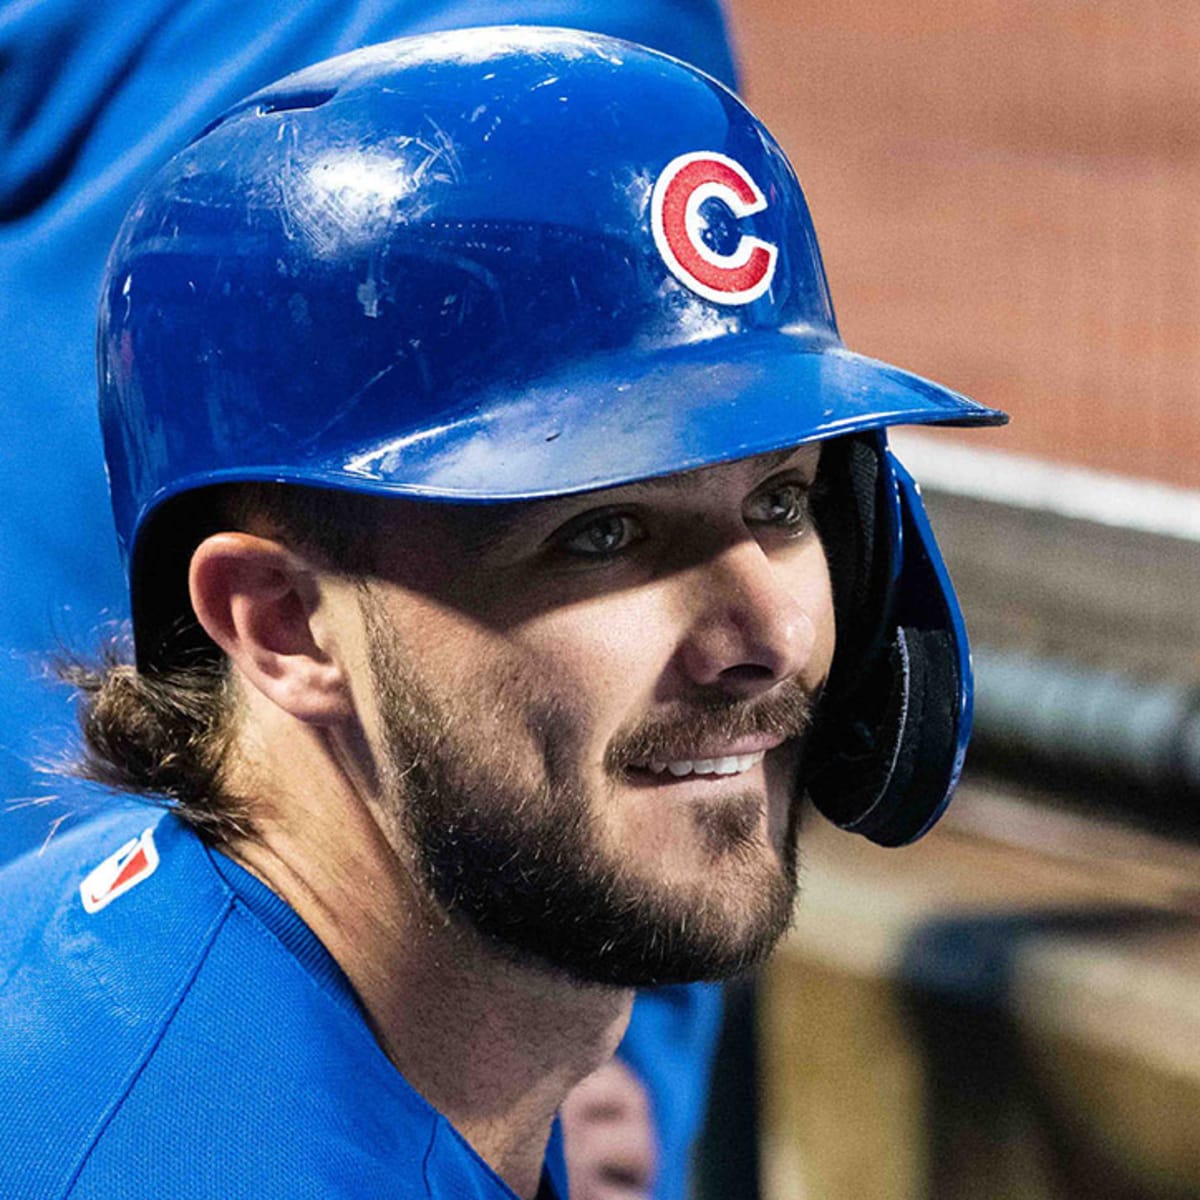 Kris Bryant could face position change upon injury return